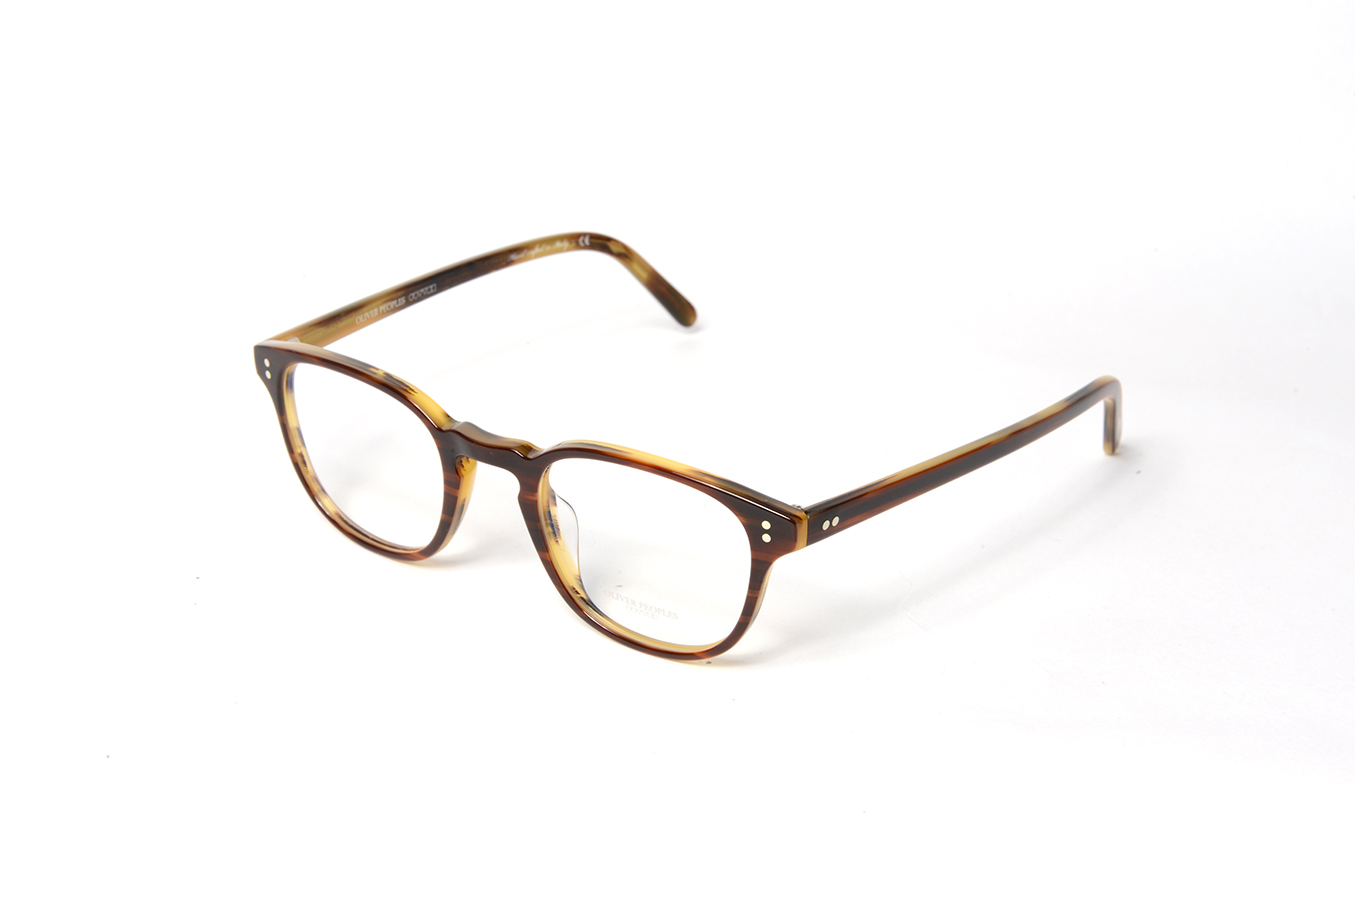 Oliver Peoples - Fairmont - Piccadilly Opticians Birmingham